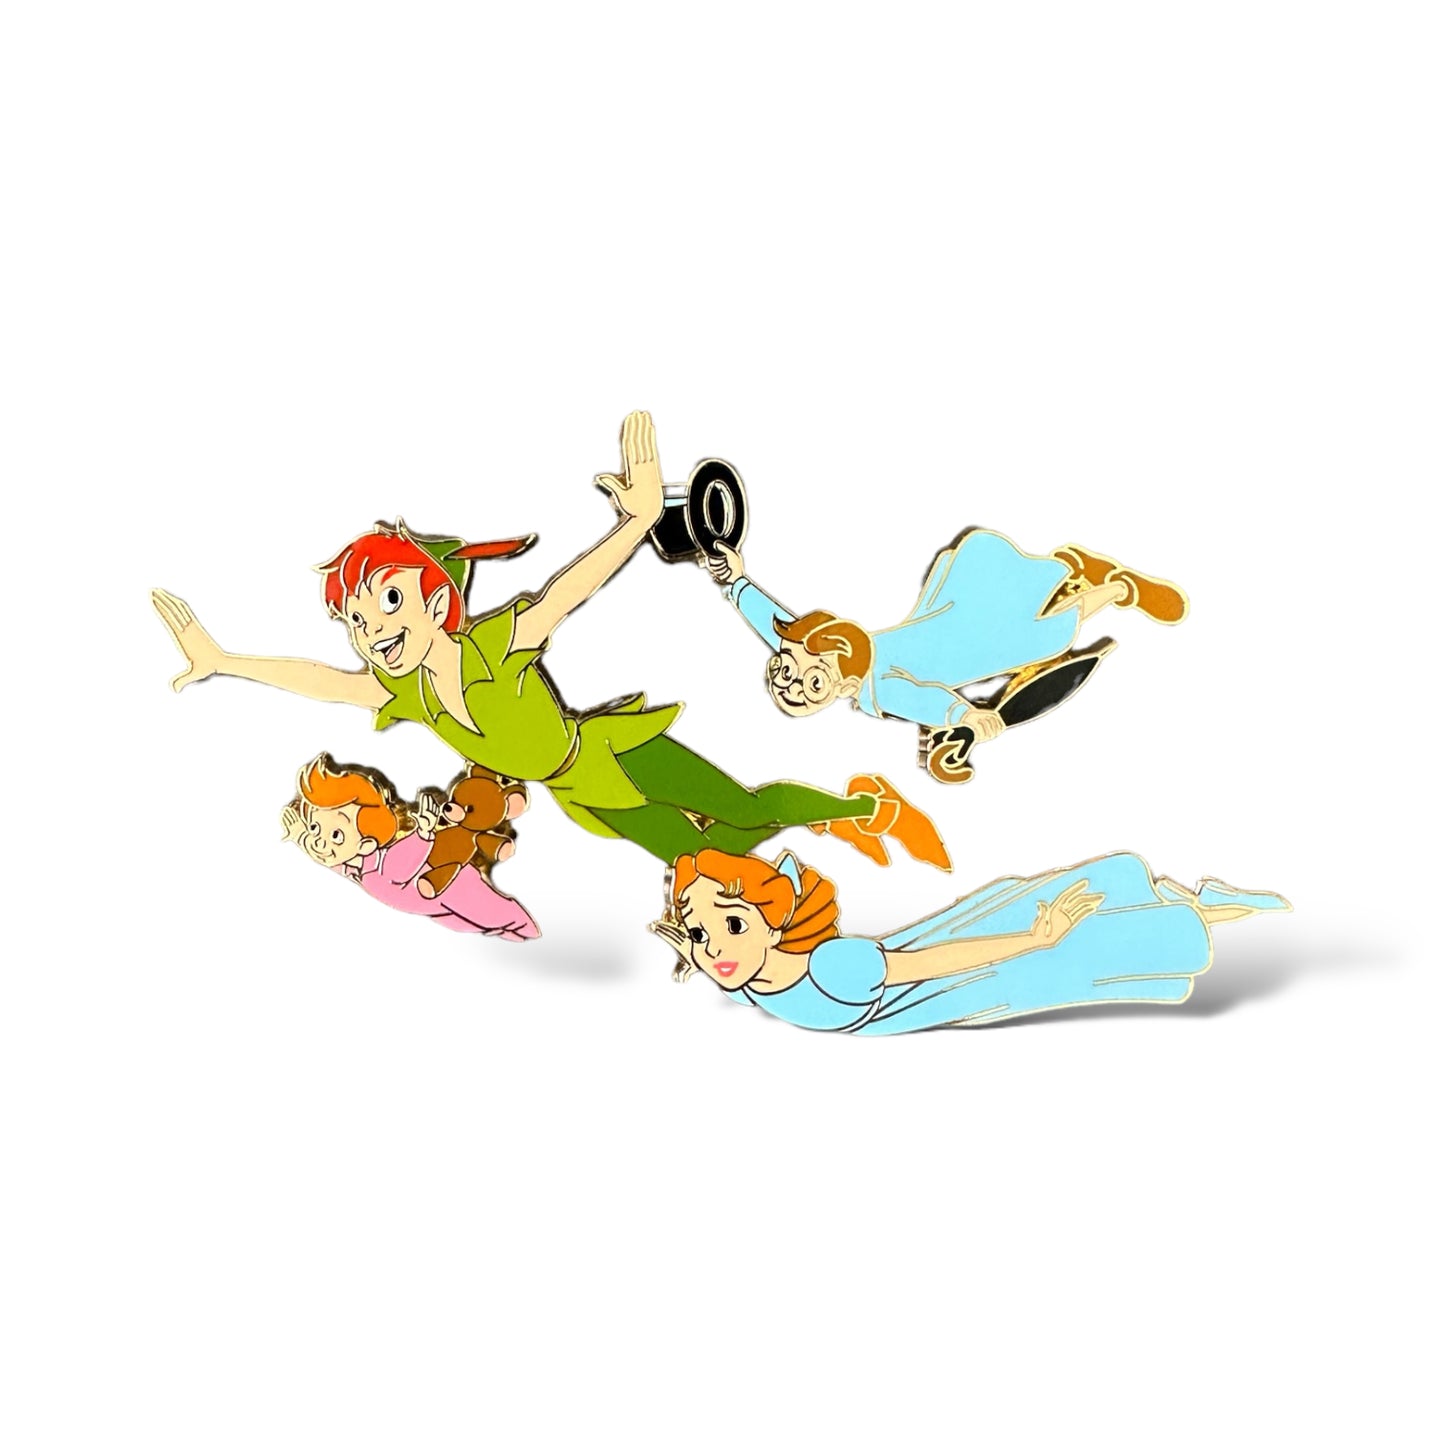 DLRP Peter Pan Flying with Darling Children Pin